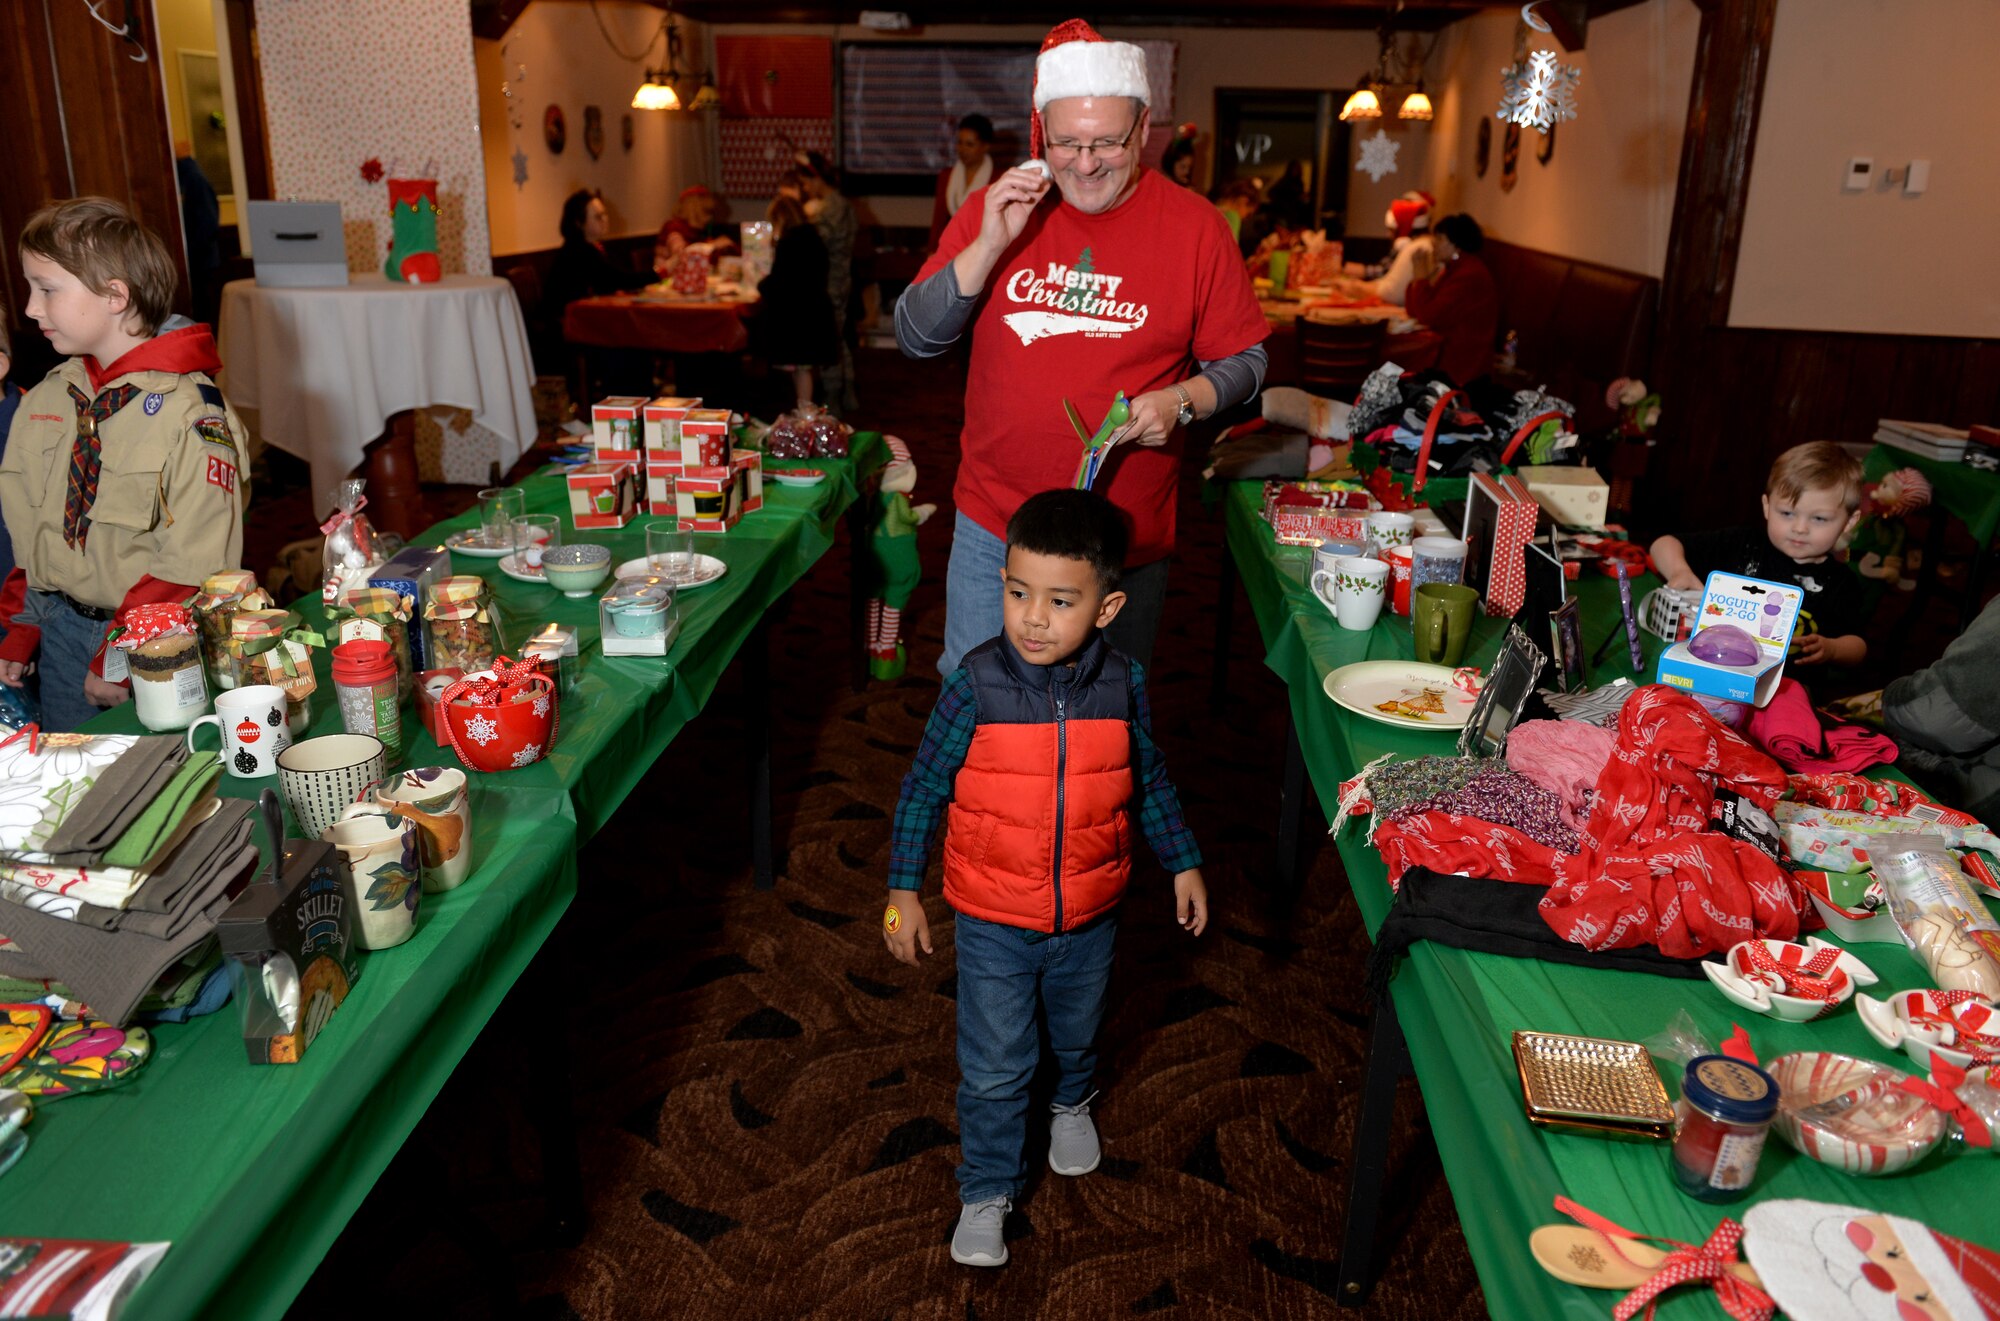 Five-year-old Kai, son of Airmen 1st Class Erik, 20th Intelligence Squadron, peruses the ‘Elf Mart’ during the annual Offutt Christmas Tree Lighting event held at the Patriot Club, Offutt Air Force Base, Nebraska, Dec. 6, 2018. For a small fee, children were able to shop and wrap gifts for their parents who were waiting in the next room. (U.S. Air Force photo by Josh Plueger)